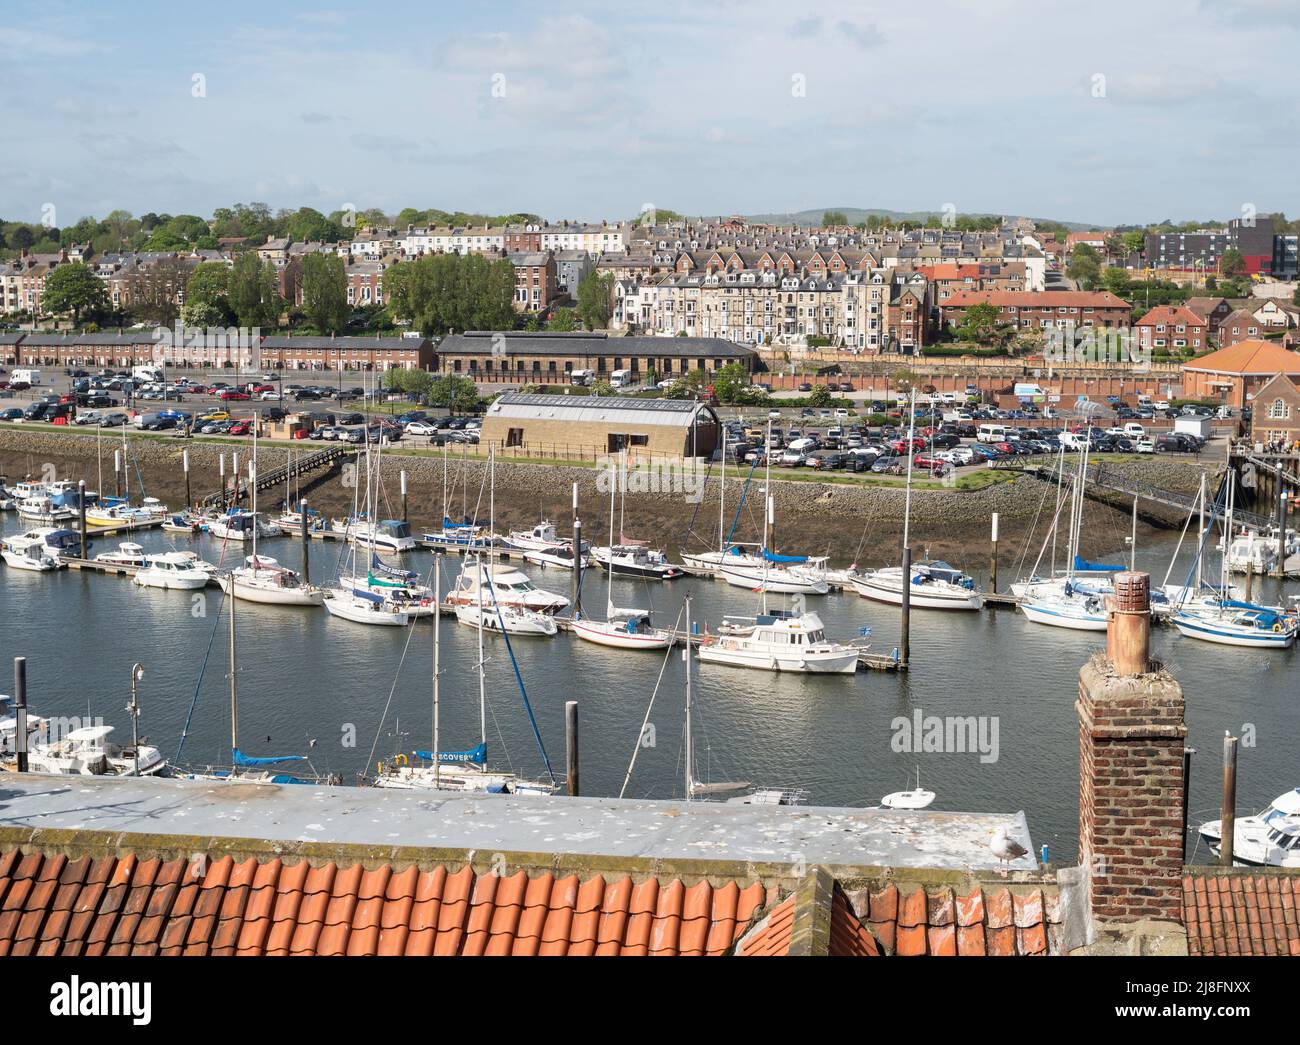 A view across the river Esk in Whitby showing boats moored in the river, Yorkshire, England Stock Photo